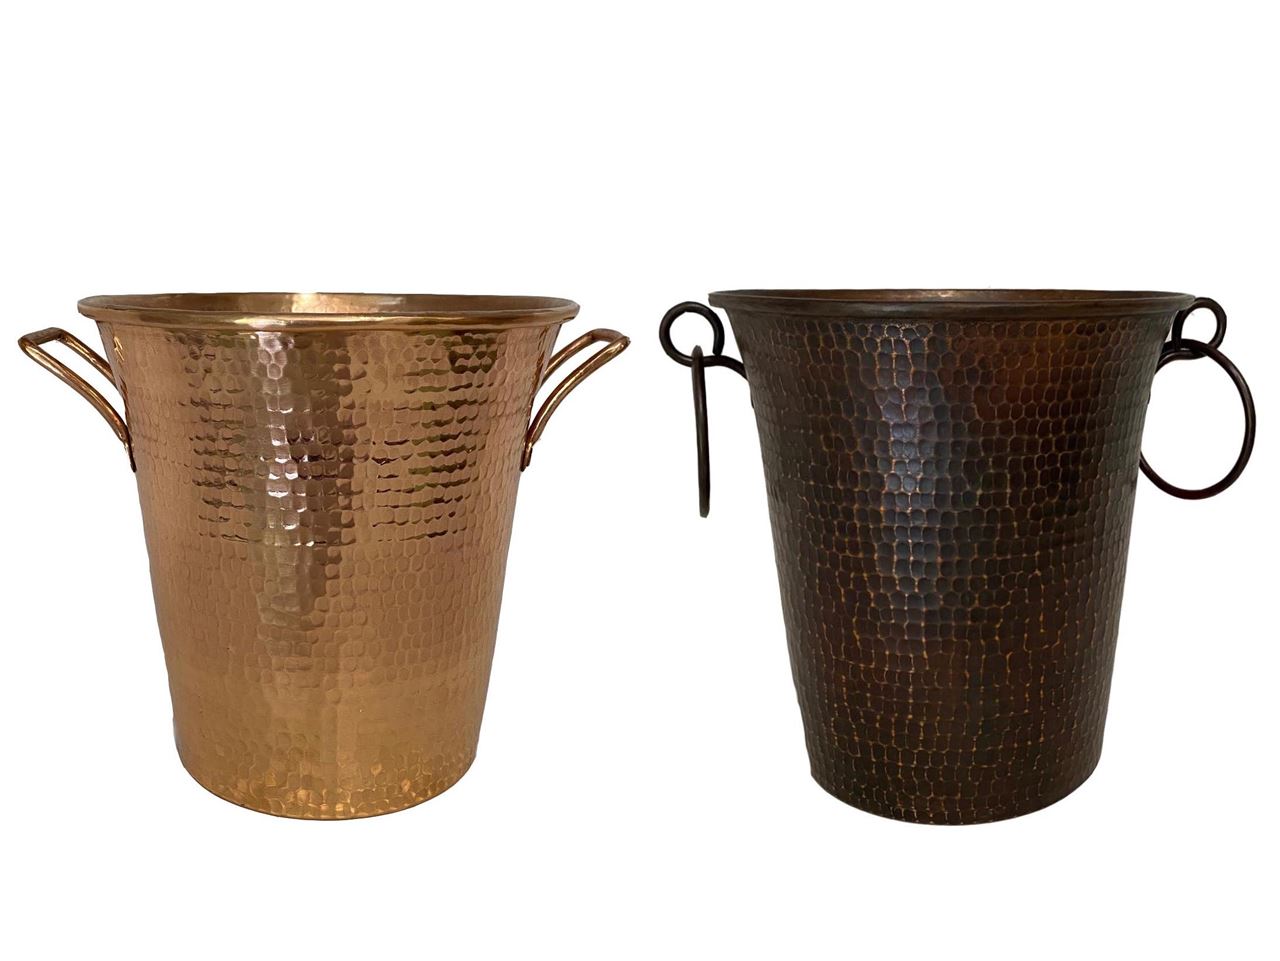 https://www.artisancraftedhome.com/images/thumbs/0072059_hammered-copper-wine-bucket-by-soluna.jpeg